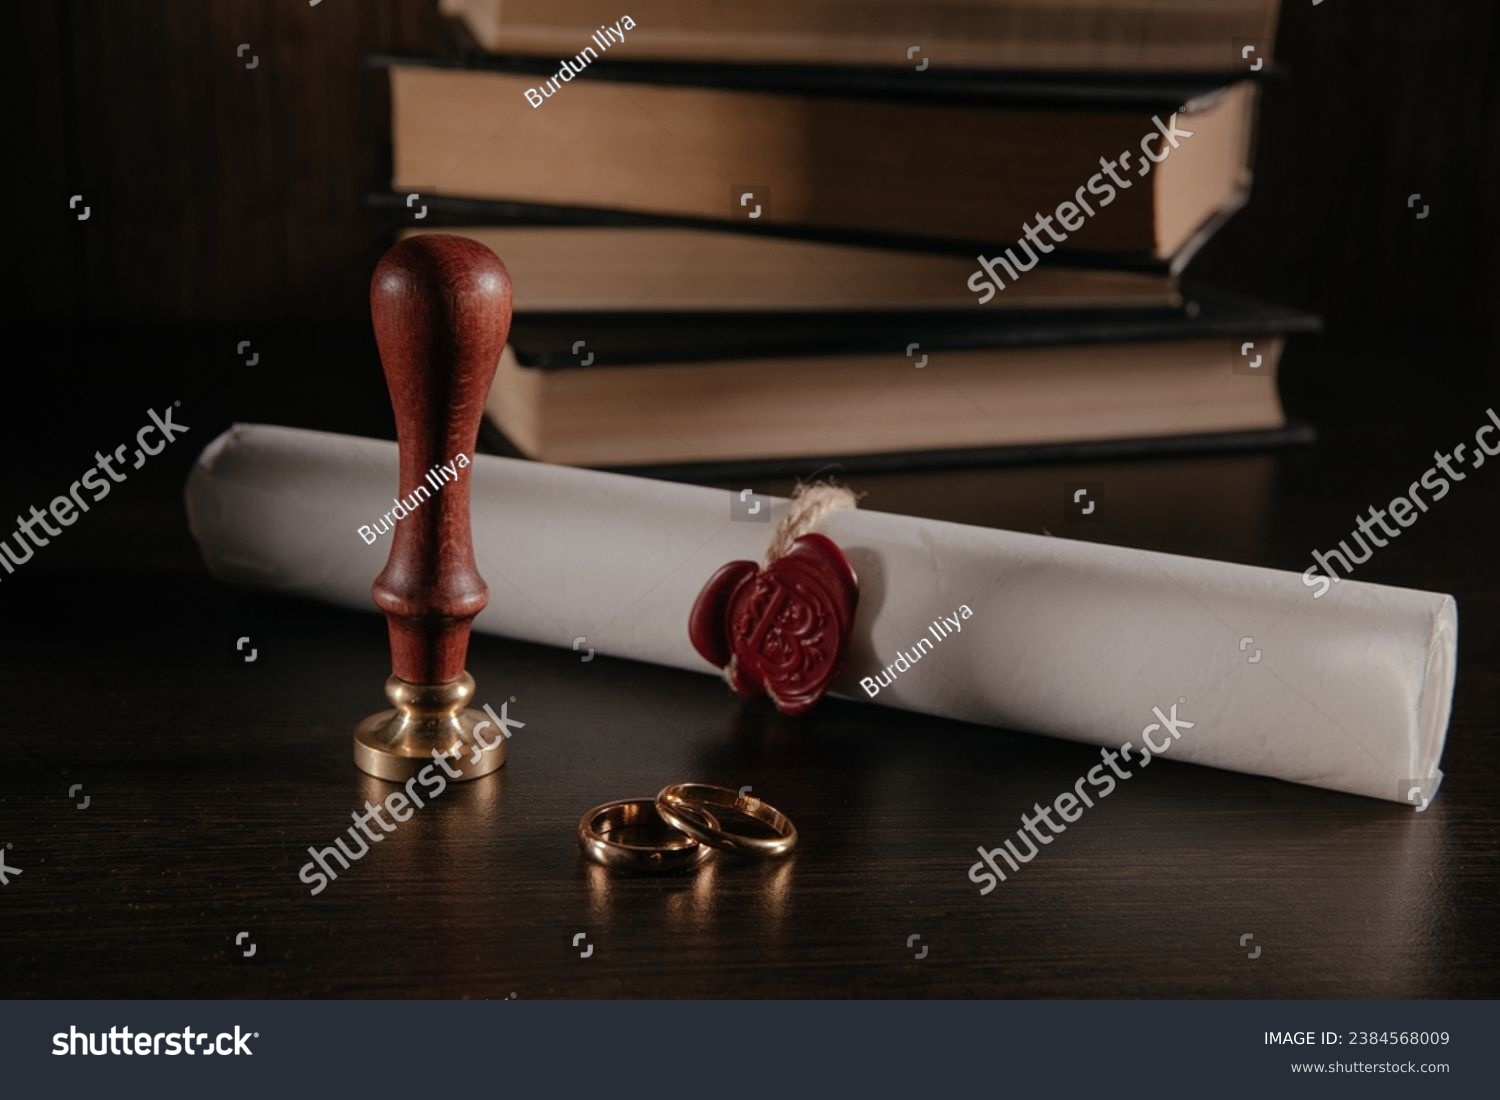 Marriage contract with seal and golden rings in a courtroom close-up. Family and law concept. #2384568009